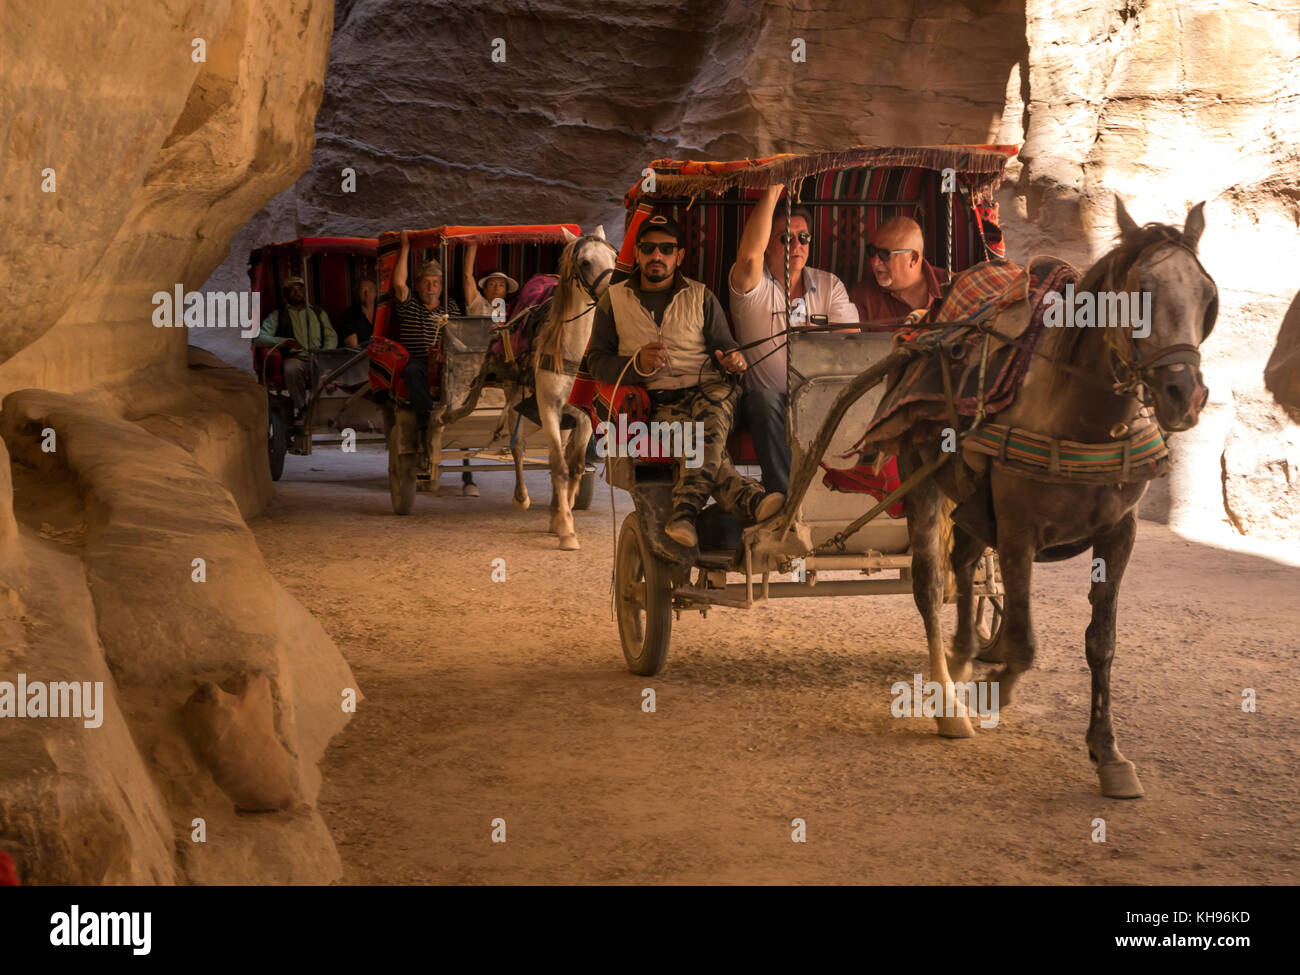 Colourful horse carriages taking tourists through the midday shade of the Siq gorge, Petra, Jordan, Middle East Stock Photo